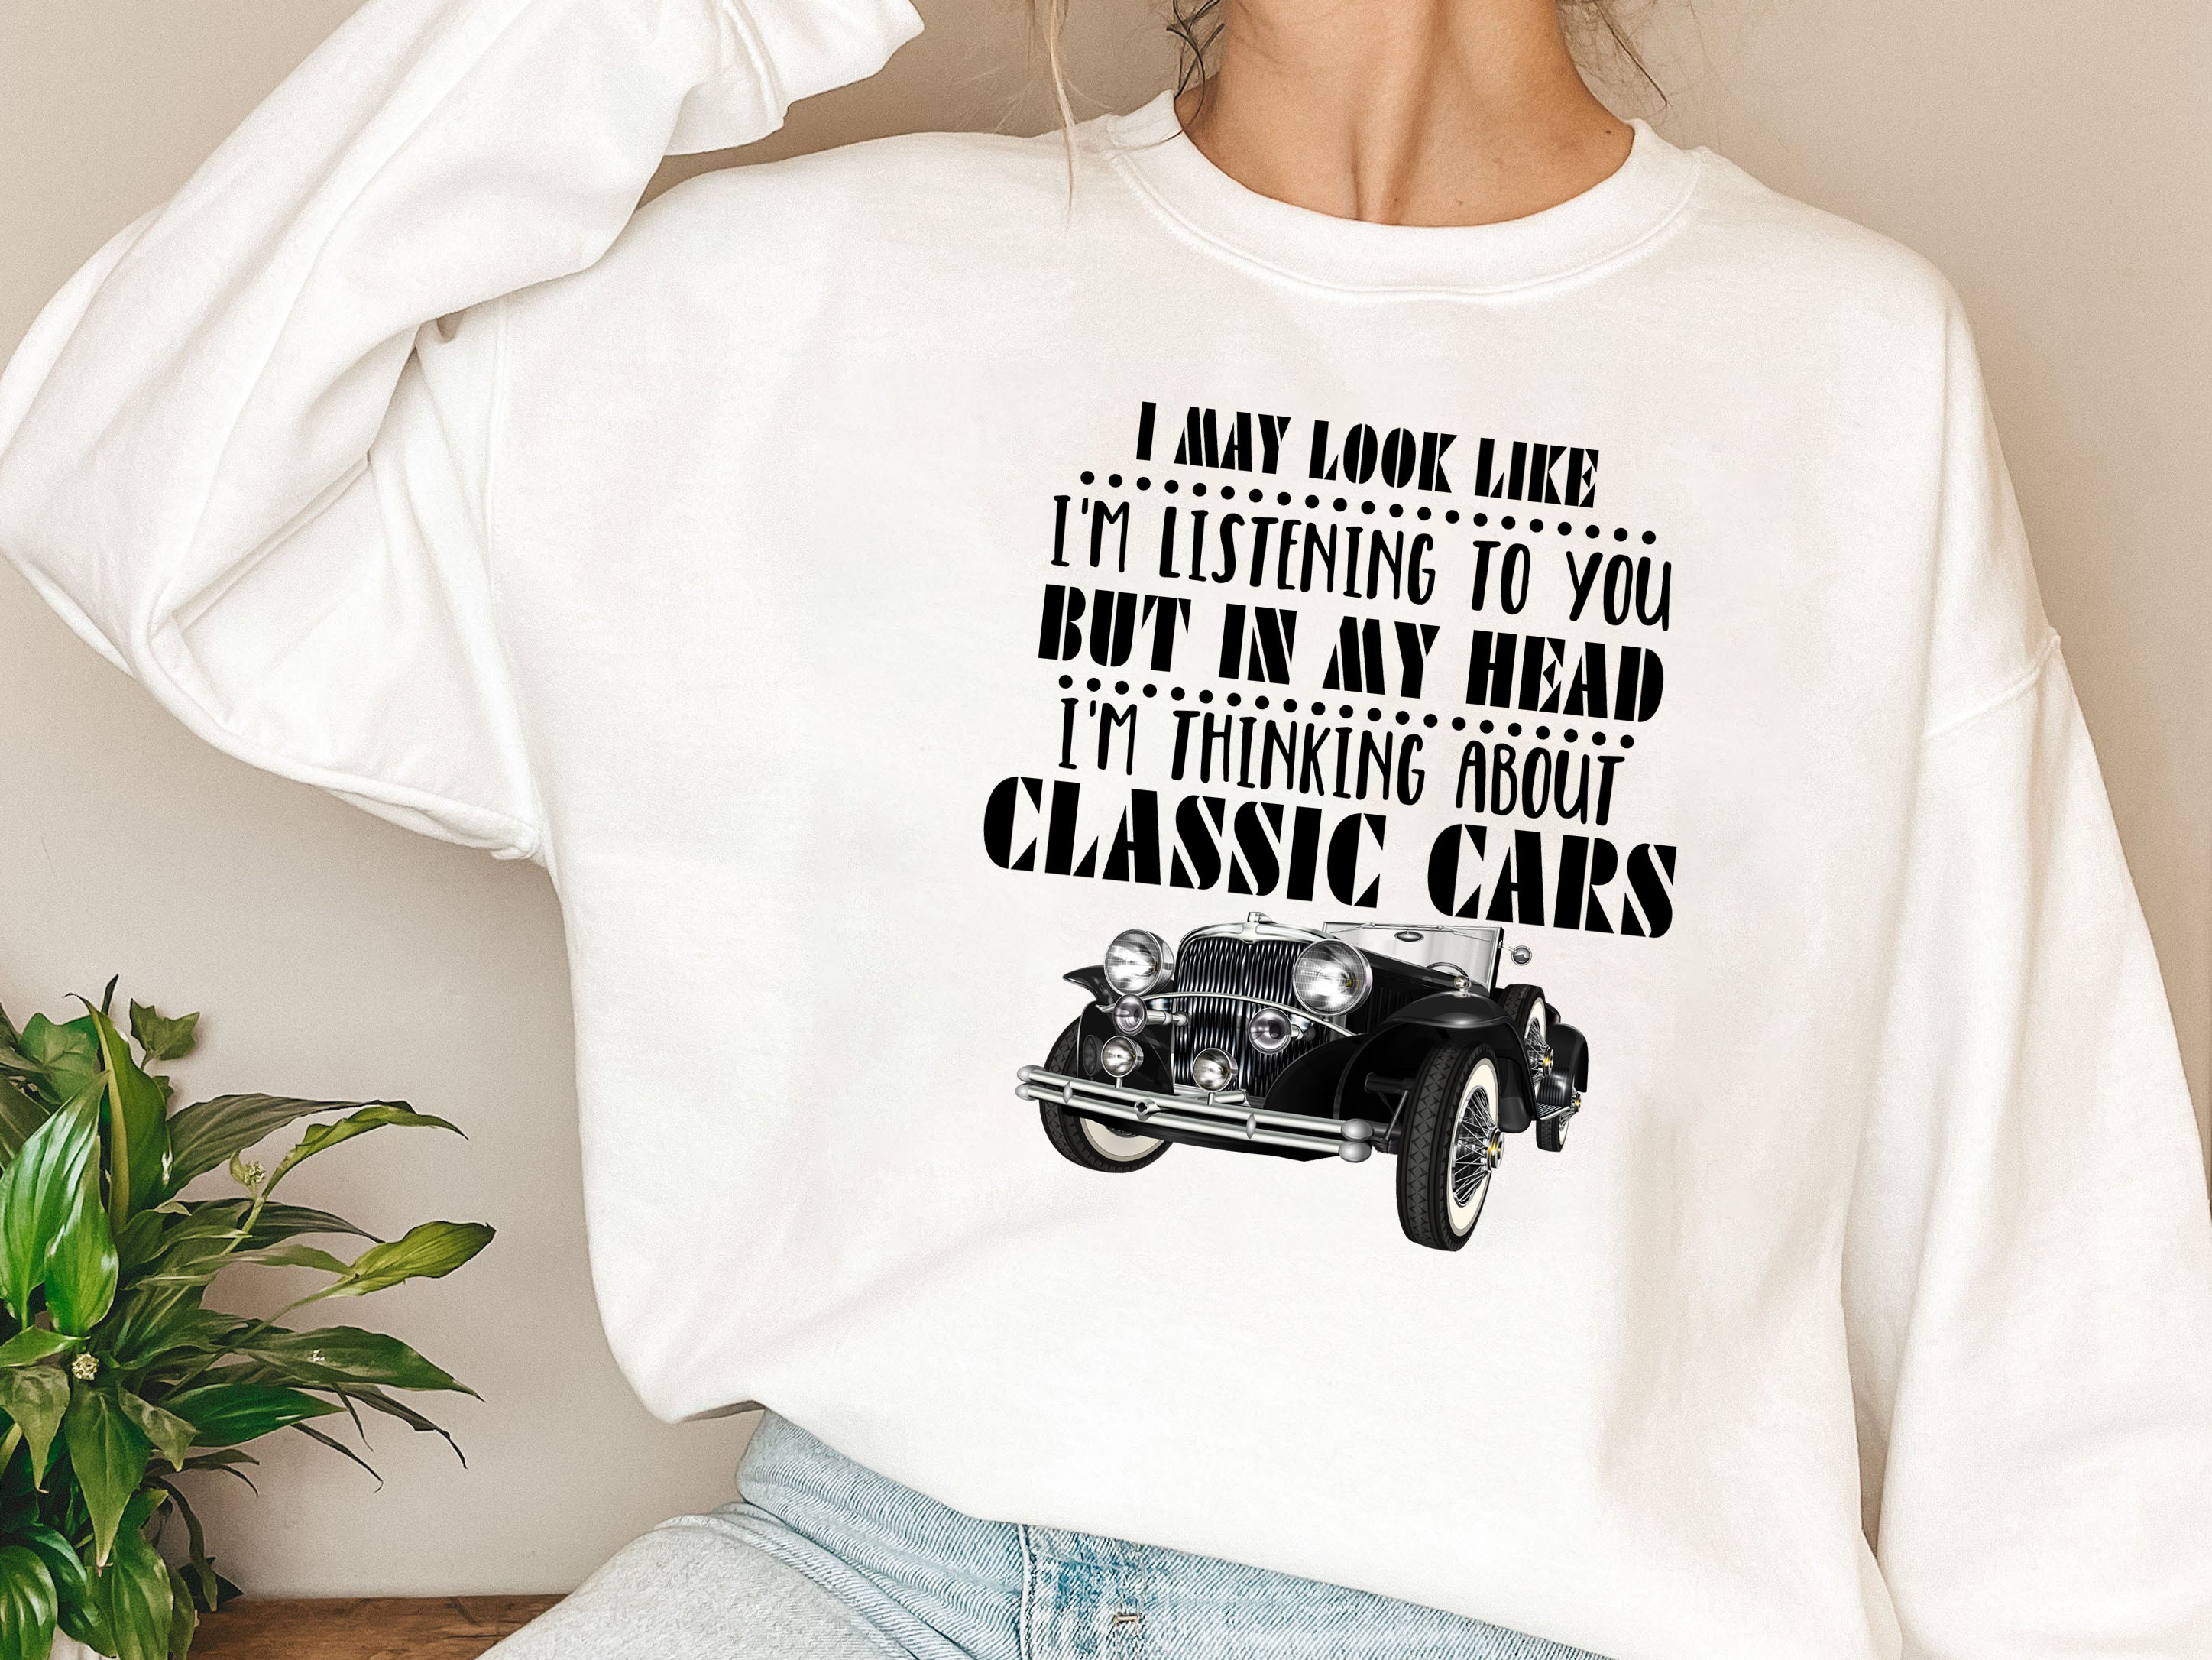 https://www.buytshirtdesigns.net/wp-content/uploads/2023/02/Funny-Automotive-Gifts-Classic-Car-Gifts-For-Him-Dad-Men-Boyfriend-Her-Gift-For-Classic-Car-Lovers-Mug-PL-1.jpg